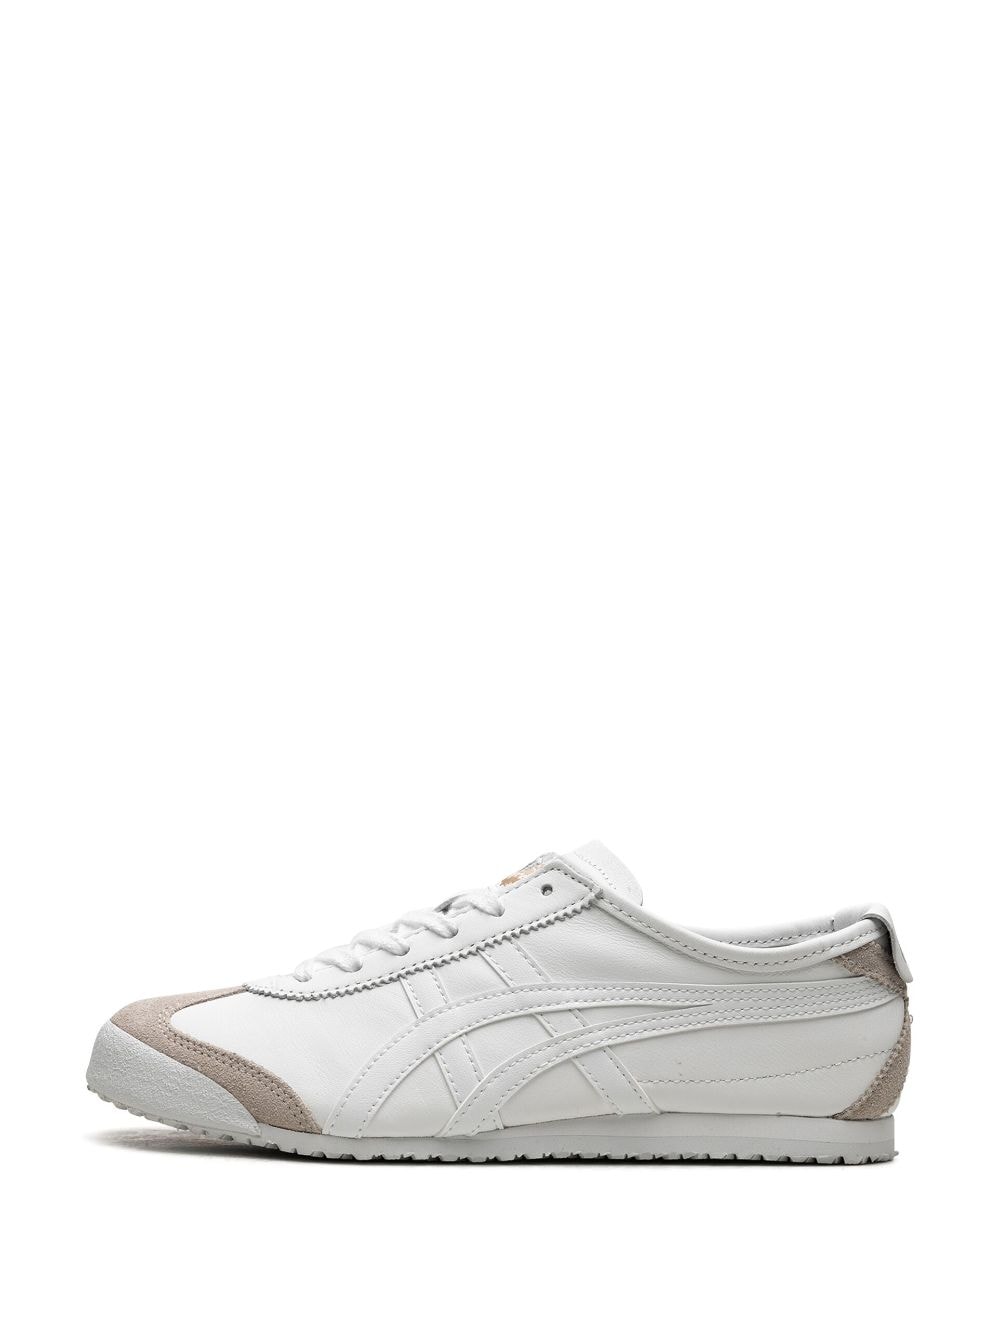 Shop Onitsuka Tiger Mexico 66 "white/beige" Sneakers